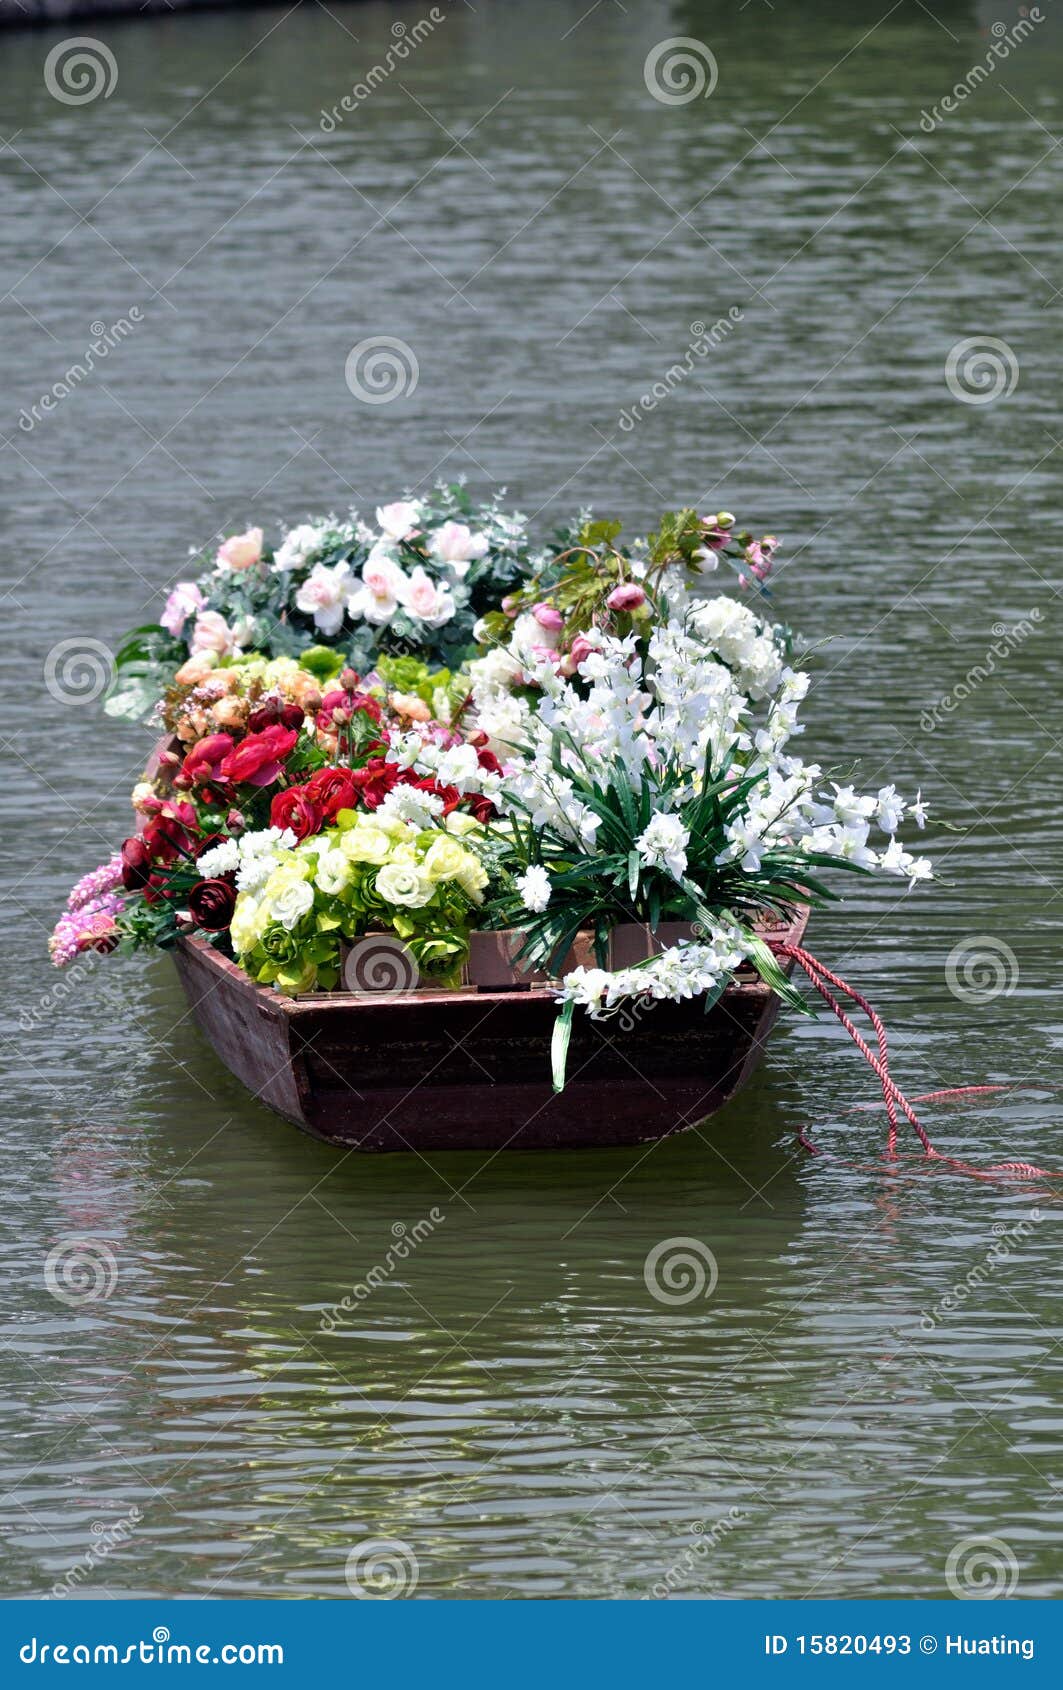 Flowers in old boat stock image. Image of quaint, colorful ...